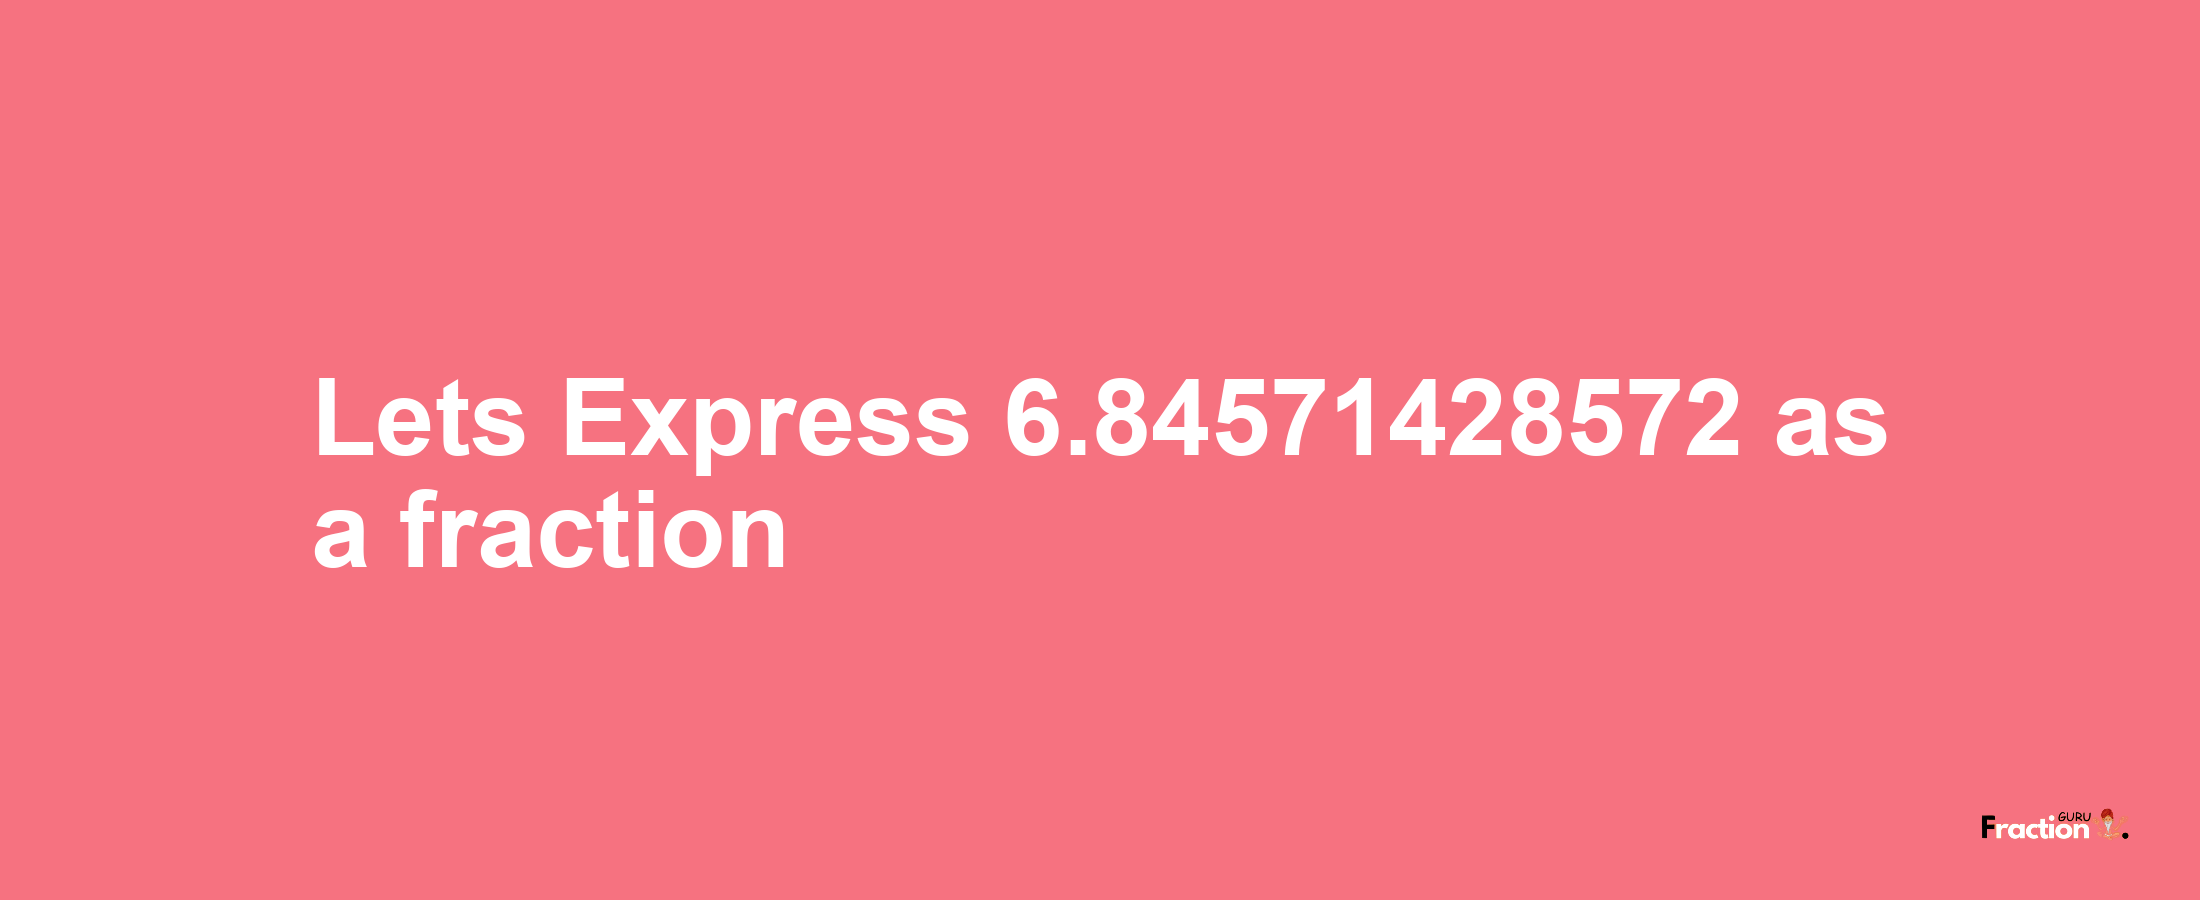 Lets Express 6.84571428572 as afraction